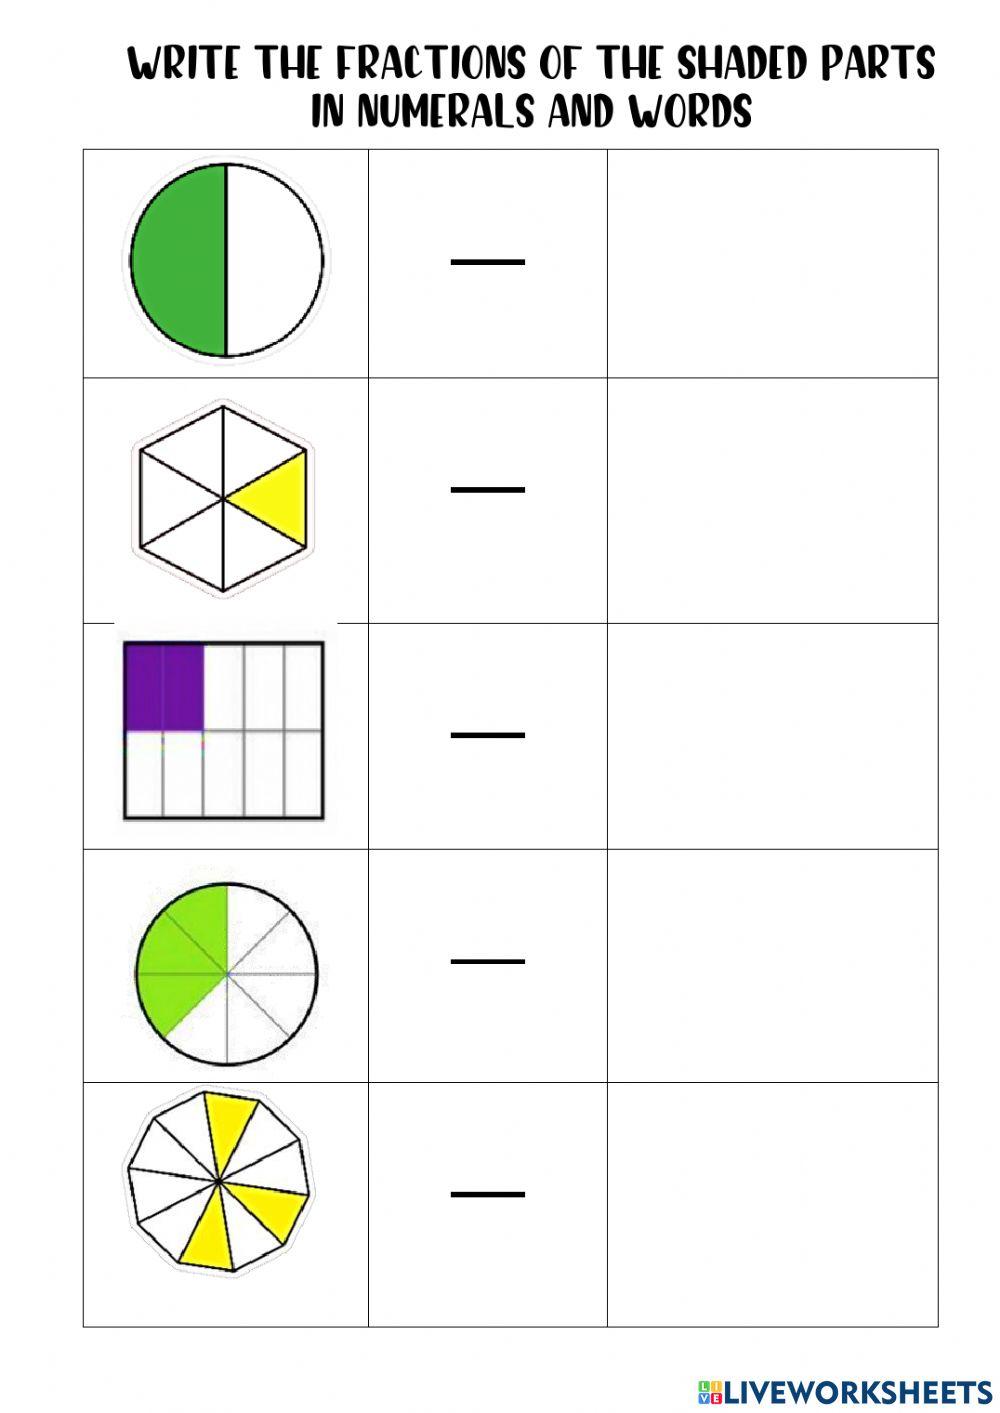 Writing fraction